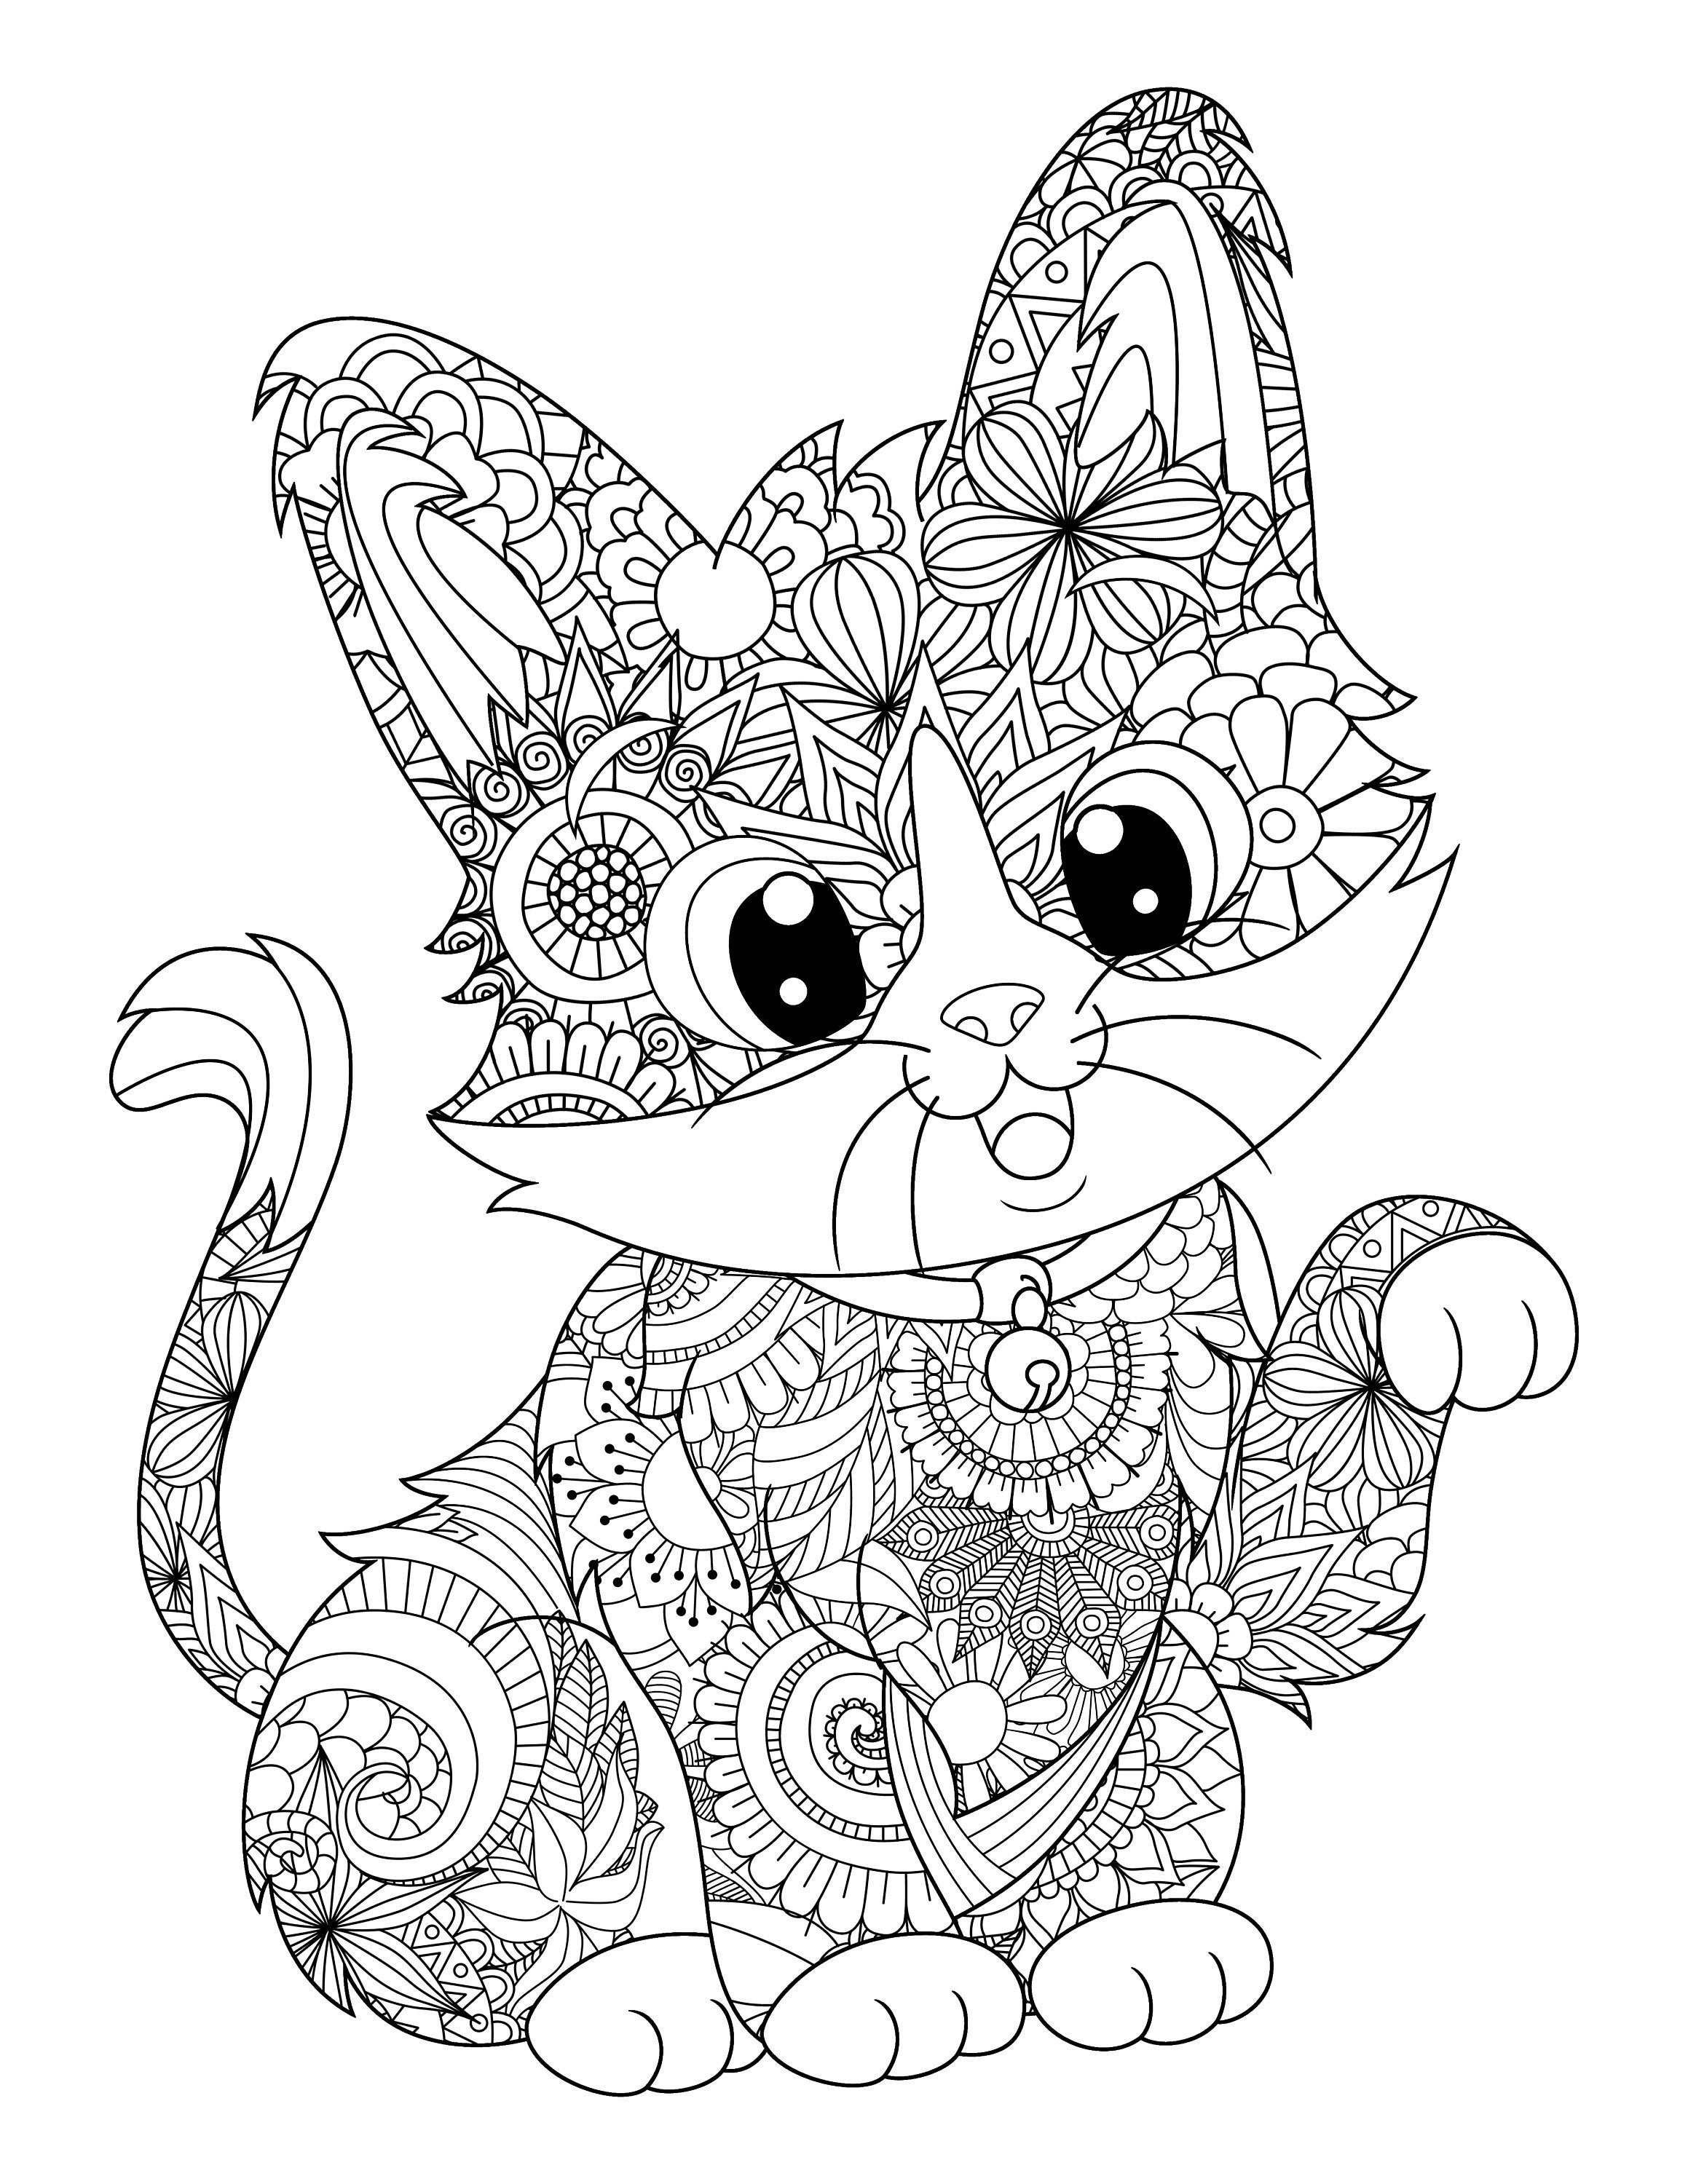 Cat   Animal Mandala Coloring Page   Instant Download